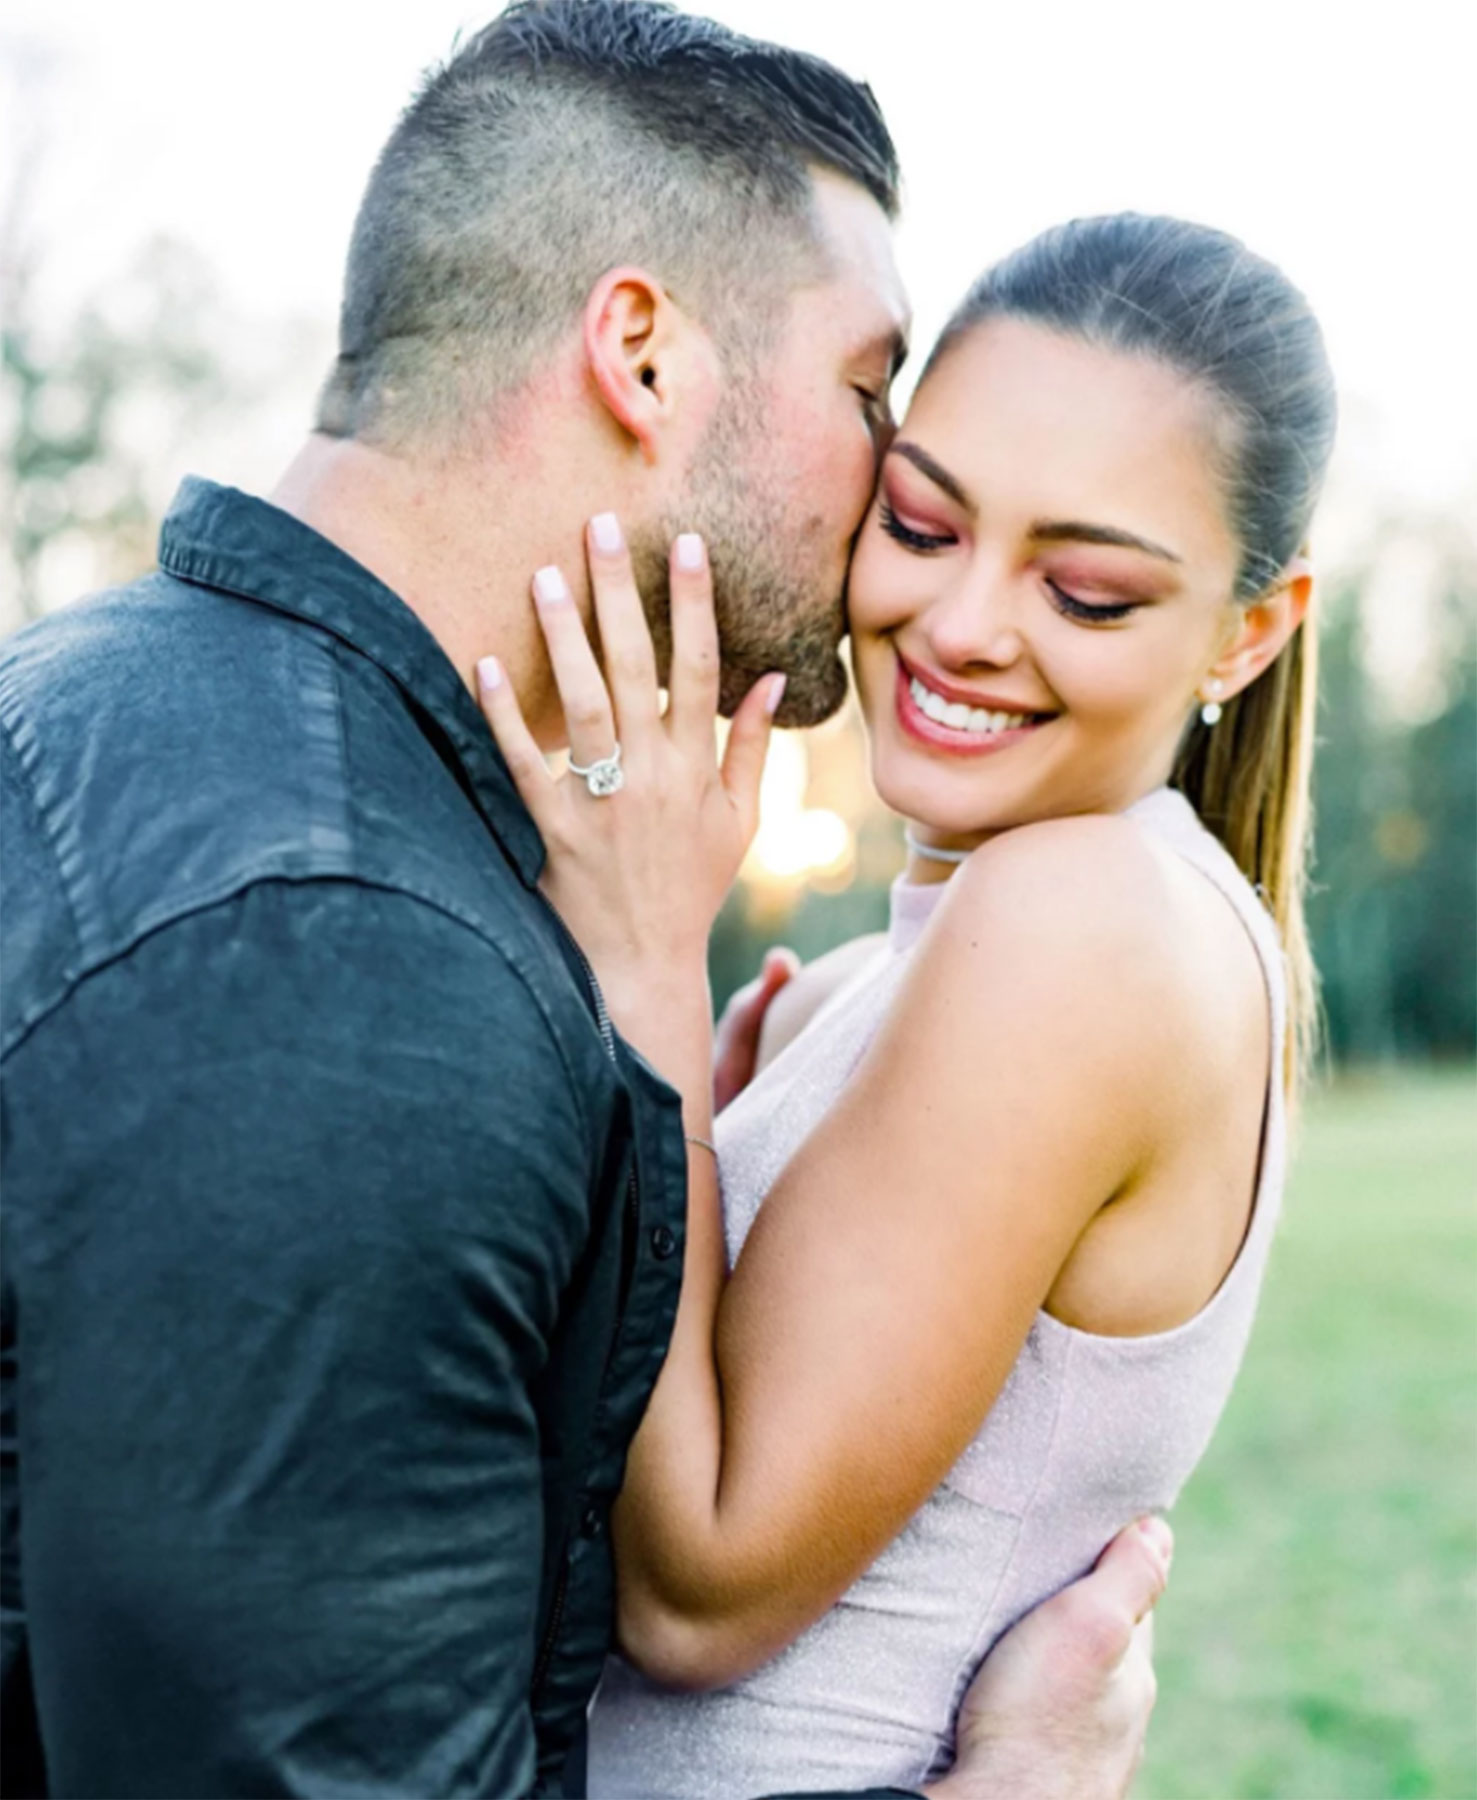 Tim Tebow Gets Engaged To Miss Universe Demi-Leigh Nel-Peters (PICS)